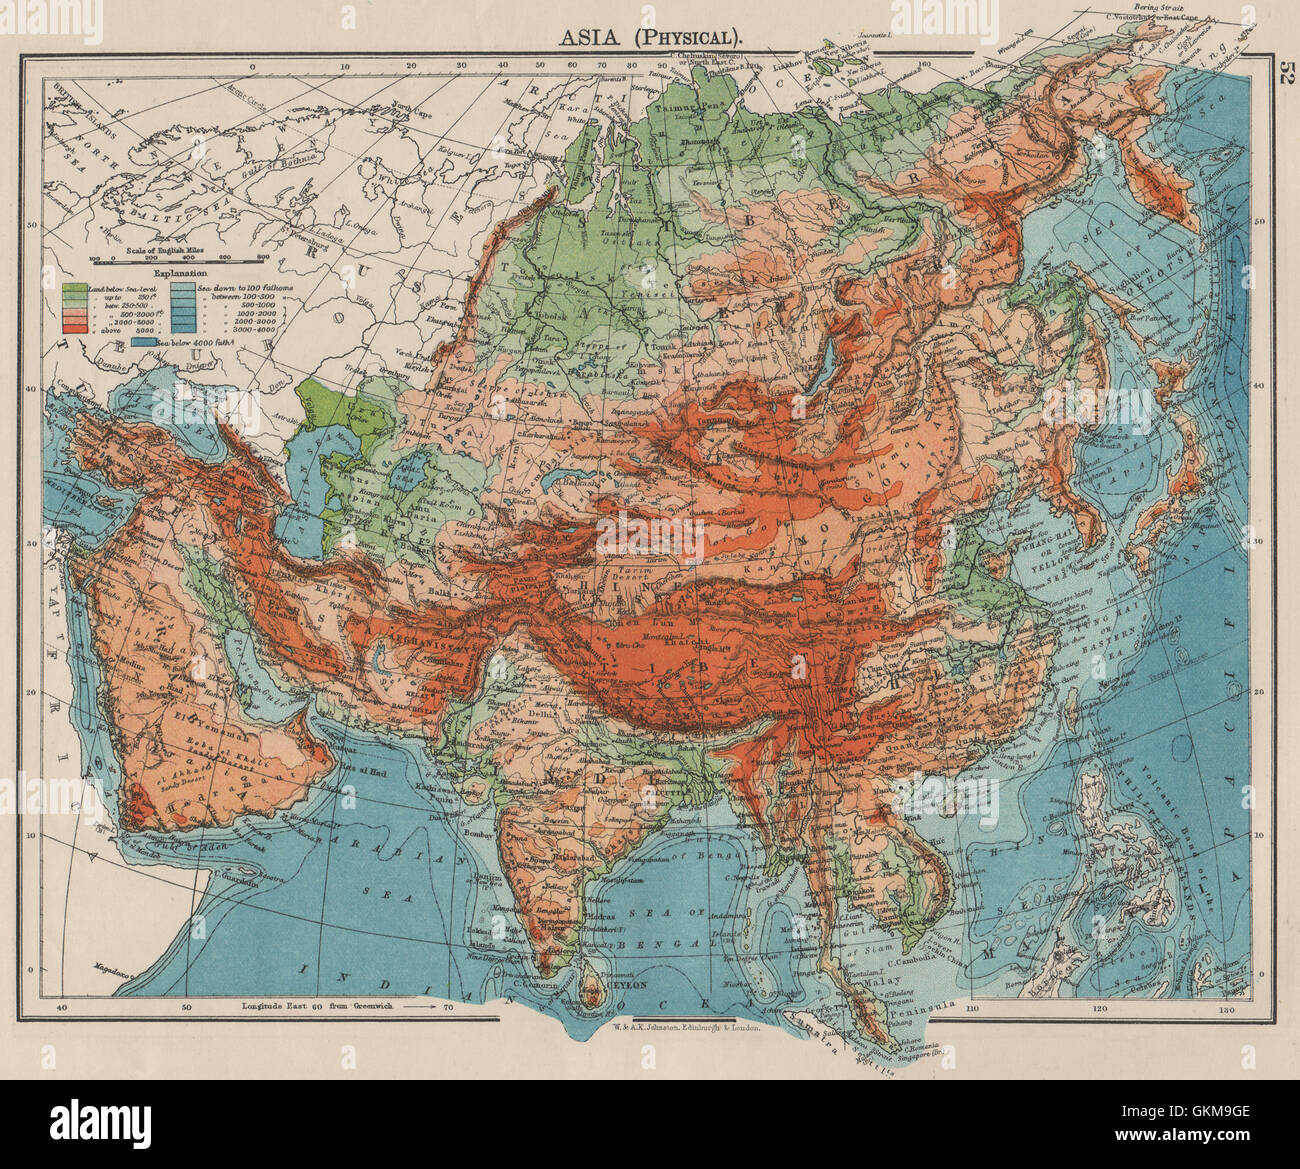 ASIA PHYSICAL. Relief Mountain heights Ocean depths Rivers. JOHNSTON, 1900 map Stock Photo